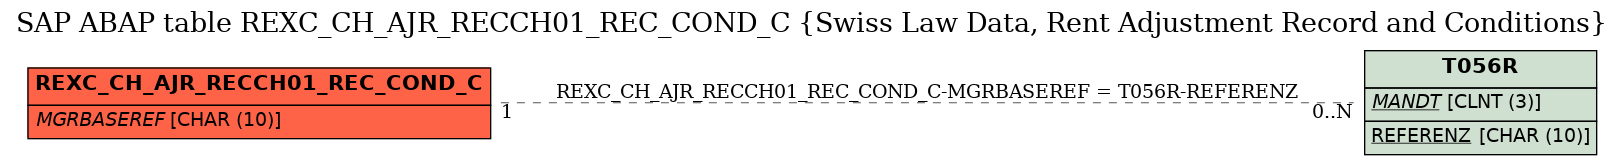 E-R Diagram for table REXC_CH_AJR_RECCH01_REC_COND_C (Swiss Law Data, Rent Adjustment Record and Conditions)